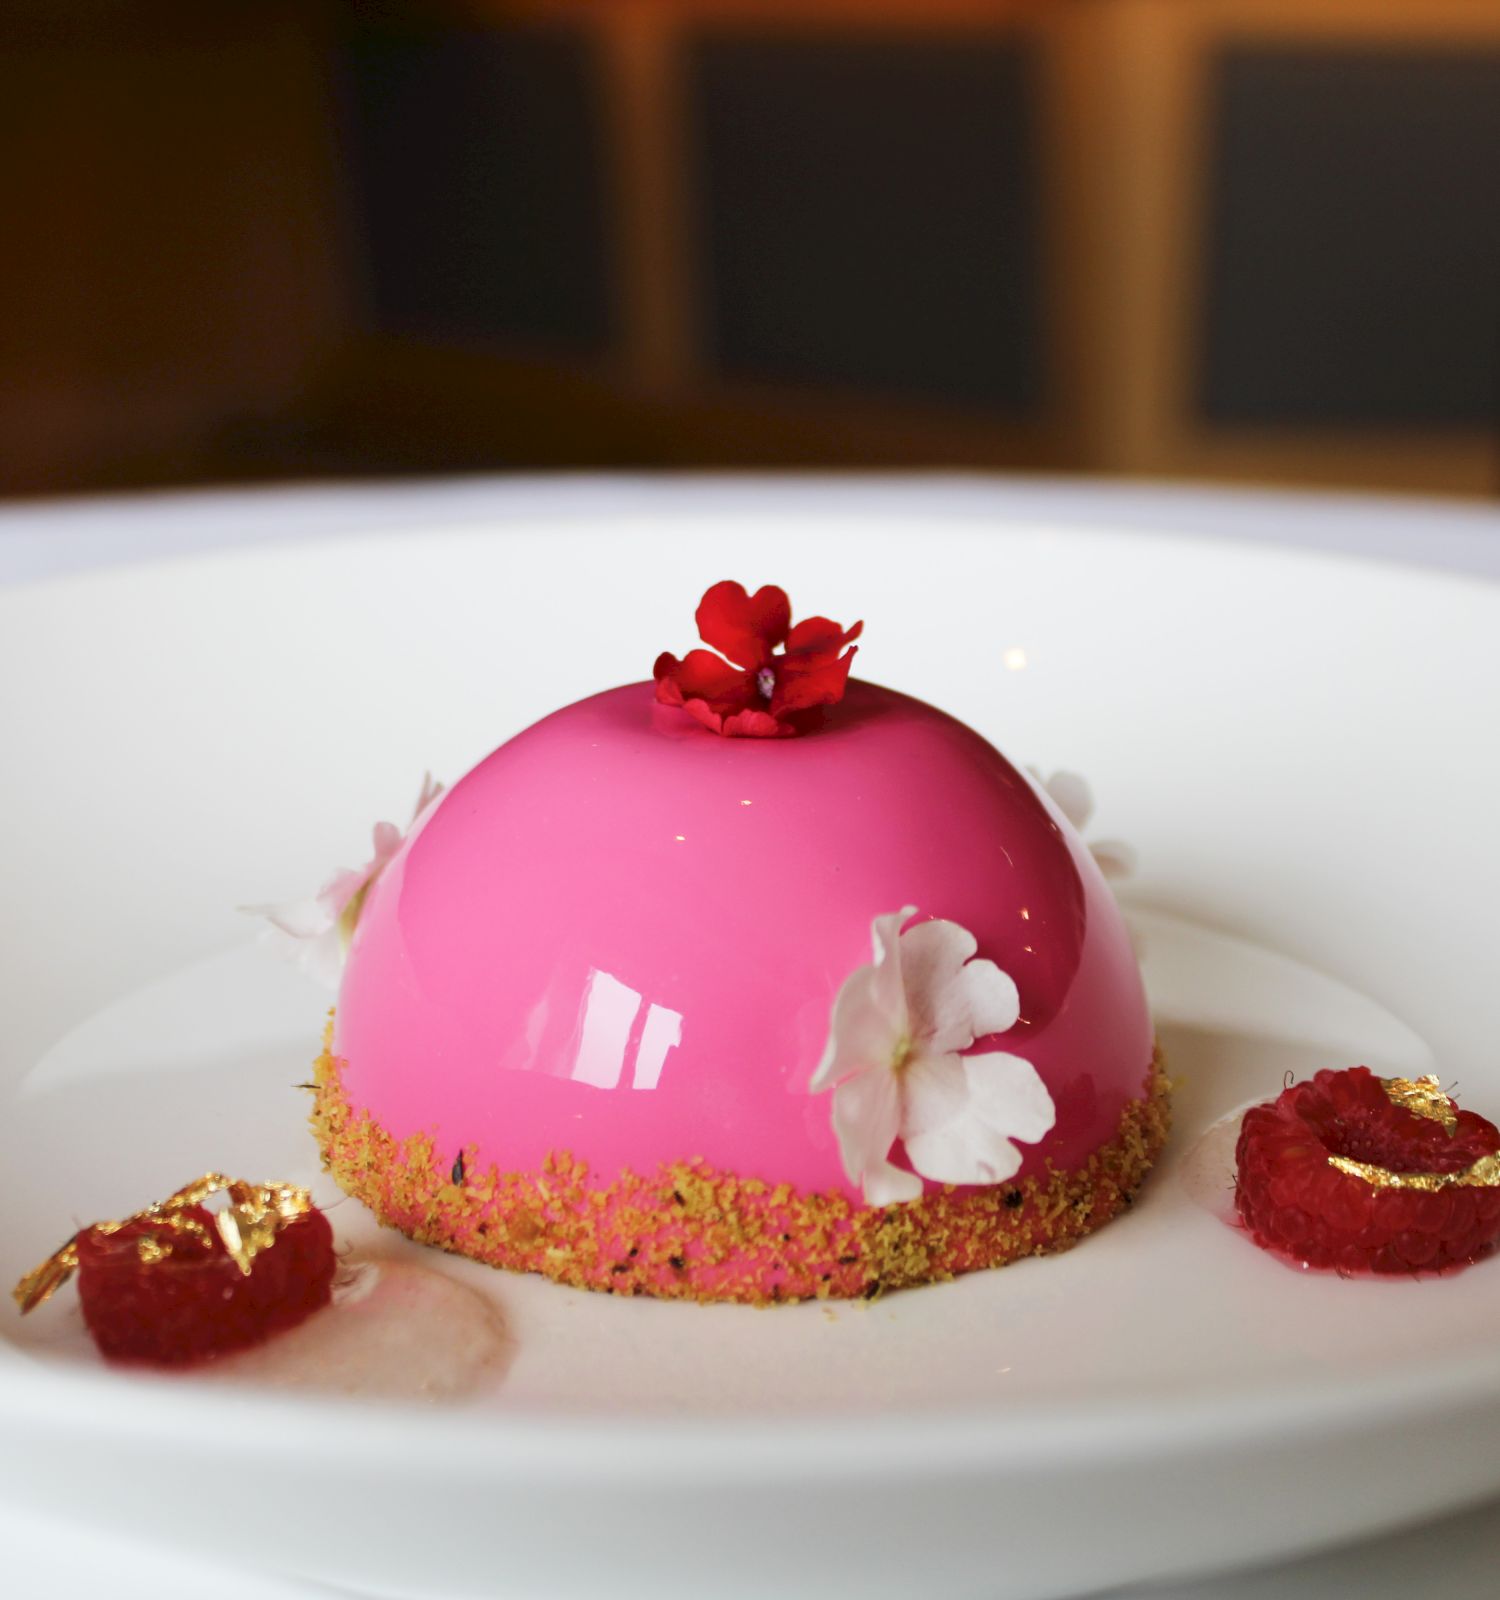 Elegant pink dessert with delicate flowers on a white plate.